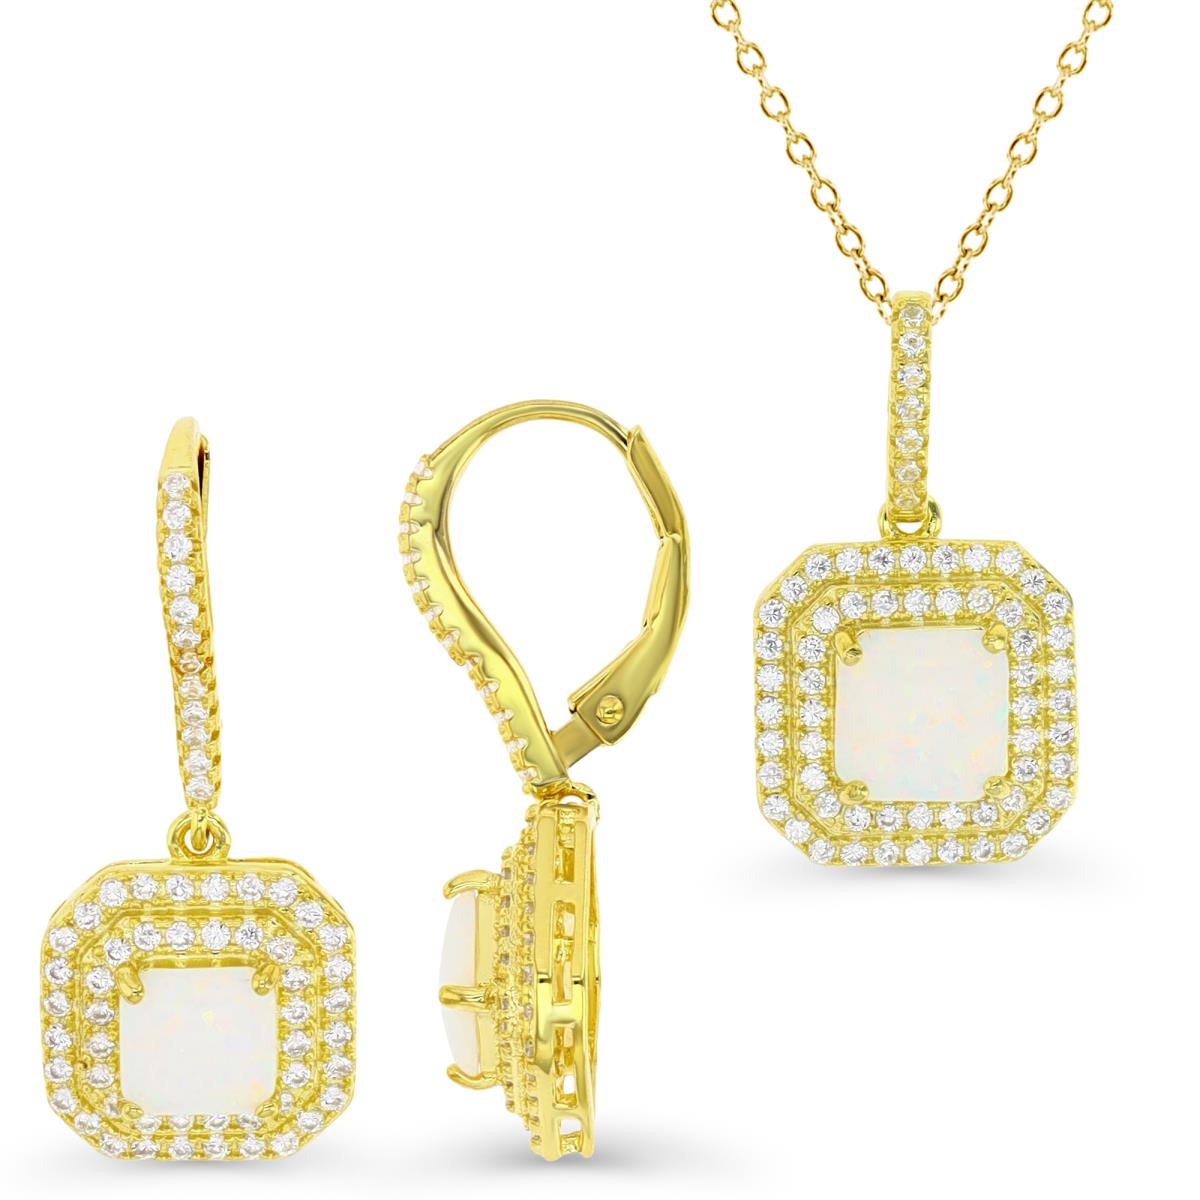 Sterling Silver Yellow 1M & CU Ct. Cr. White Opal and White CZ Halo Earrings and 18" Necklace Set